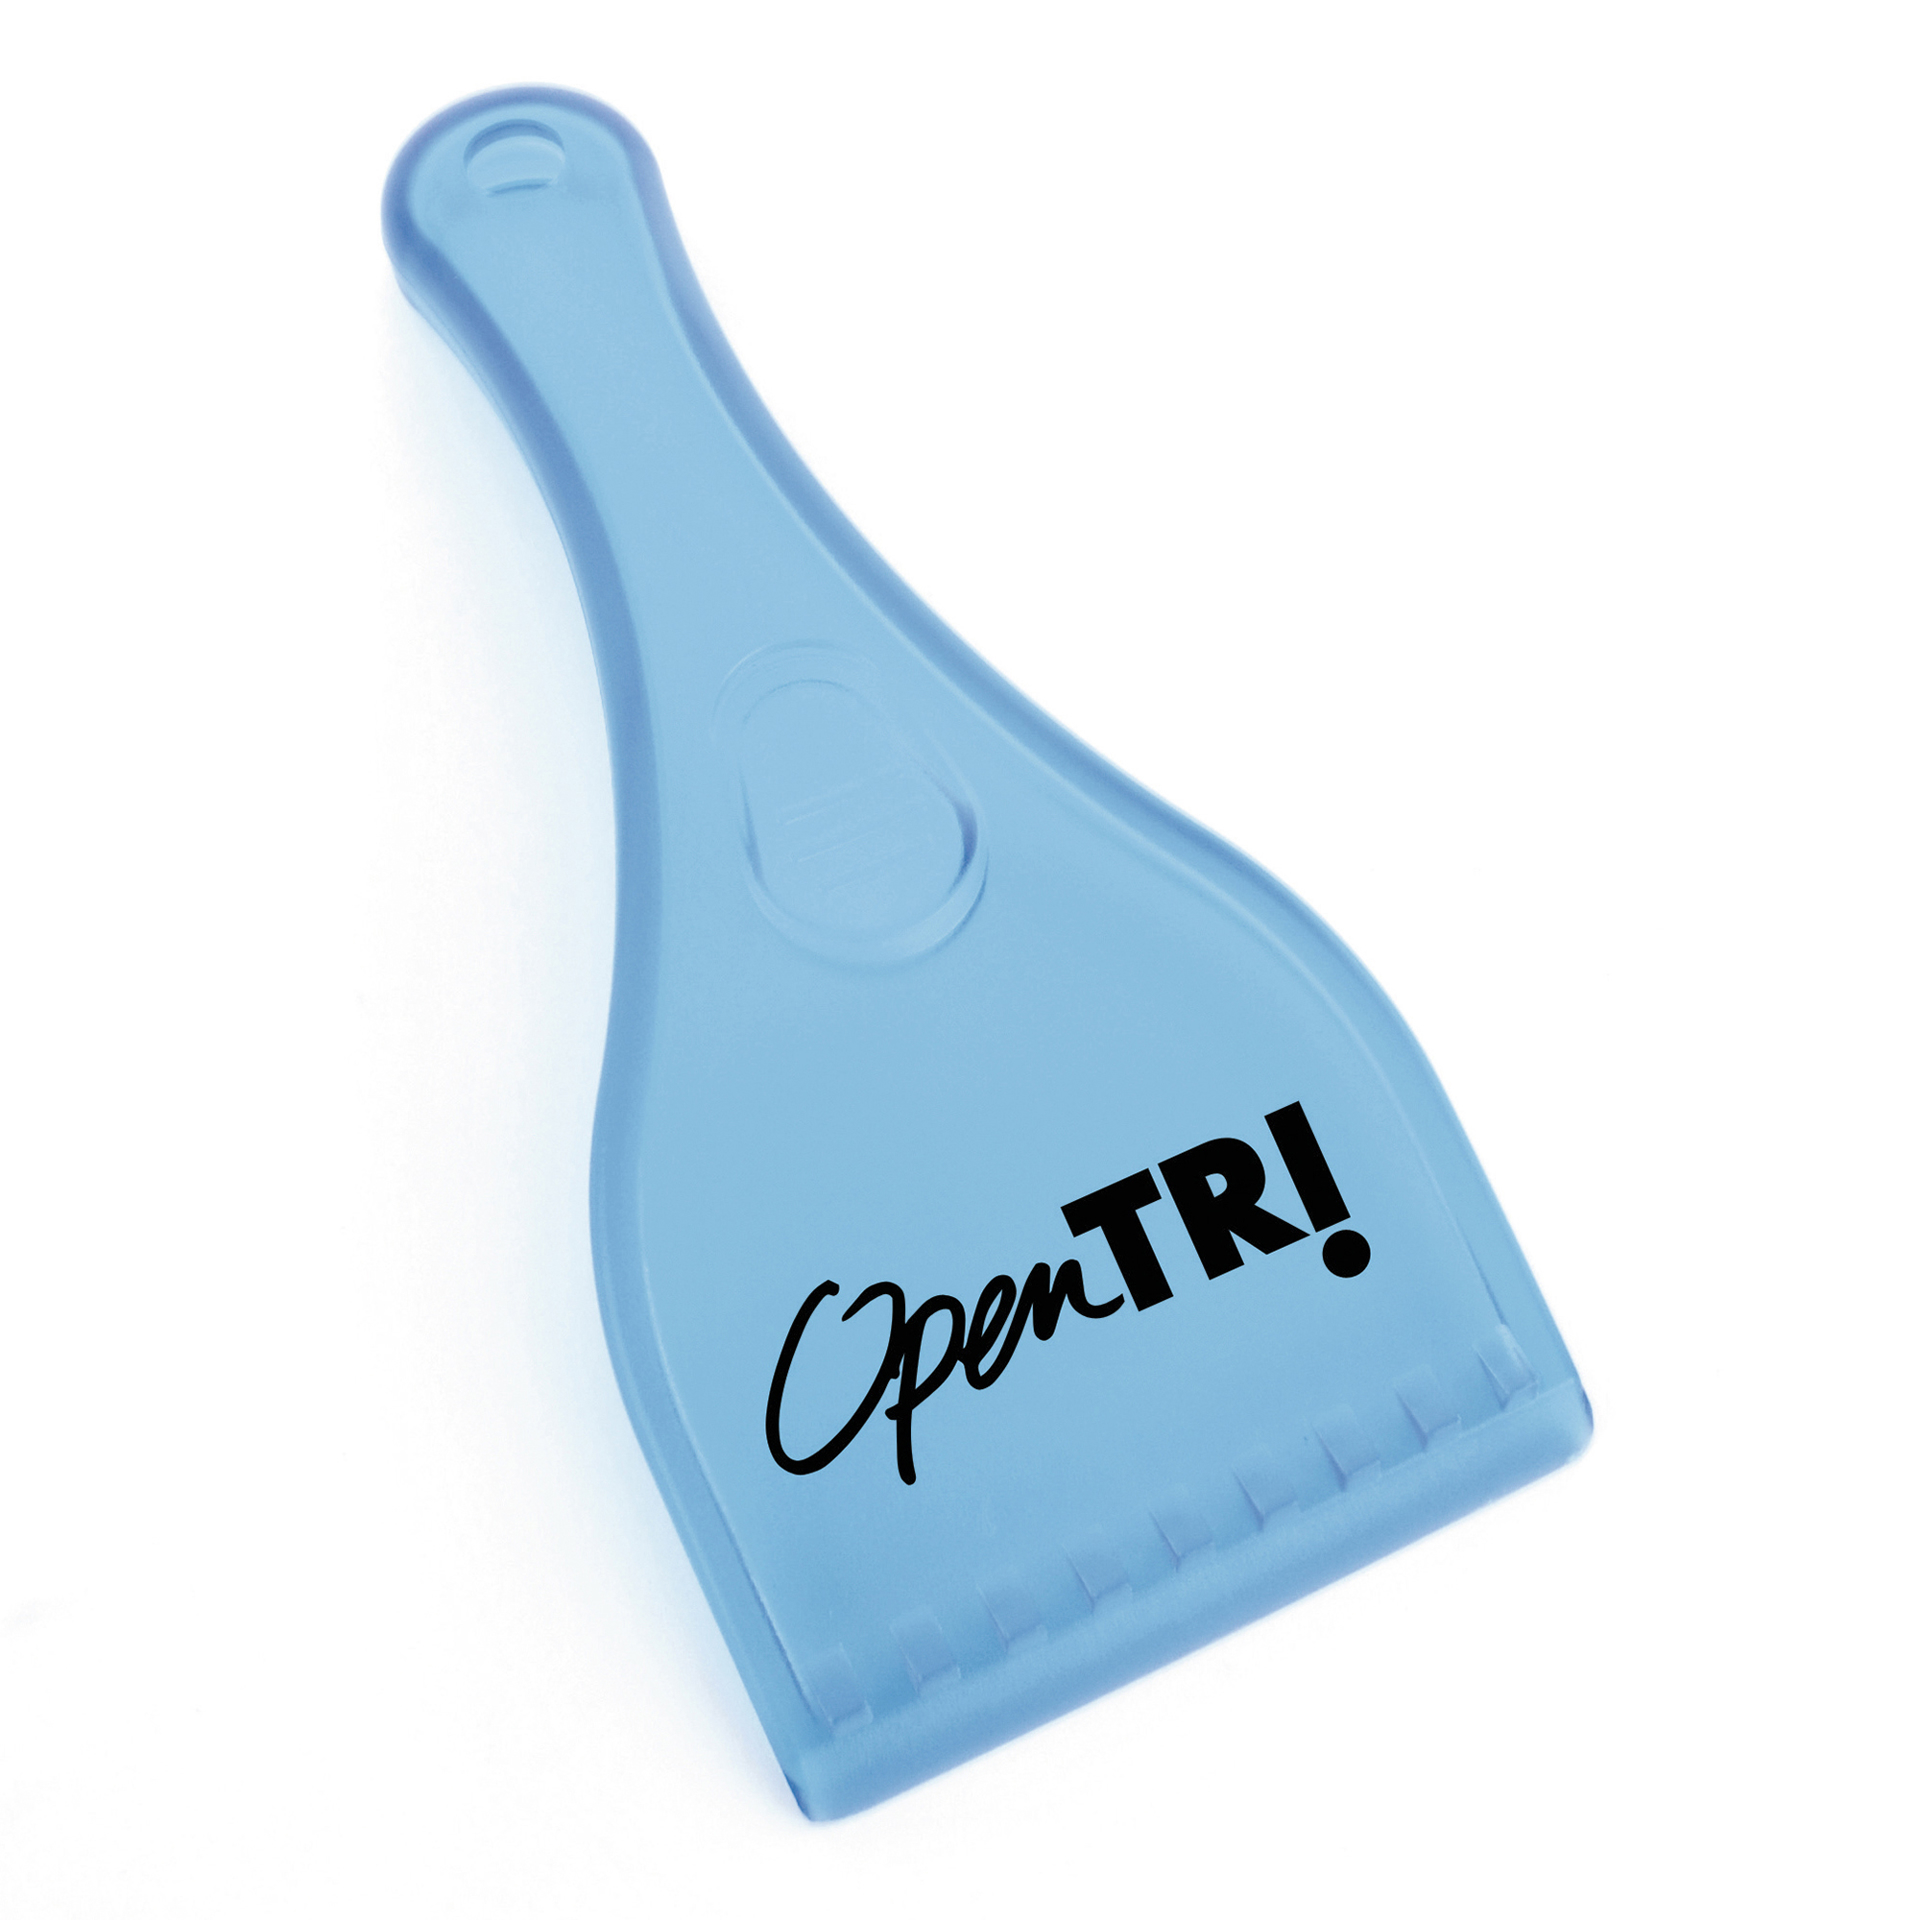 ice scraper with handle in light blue with a black logo